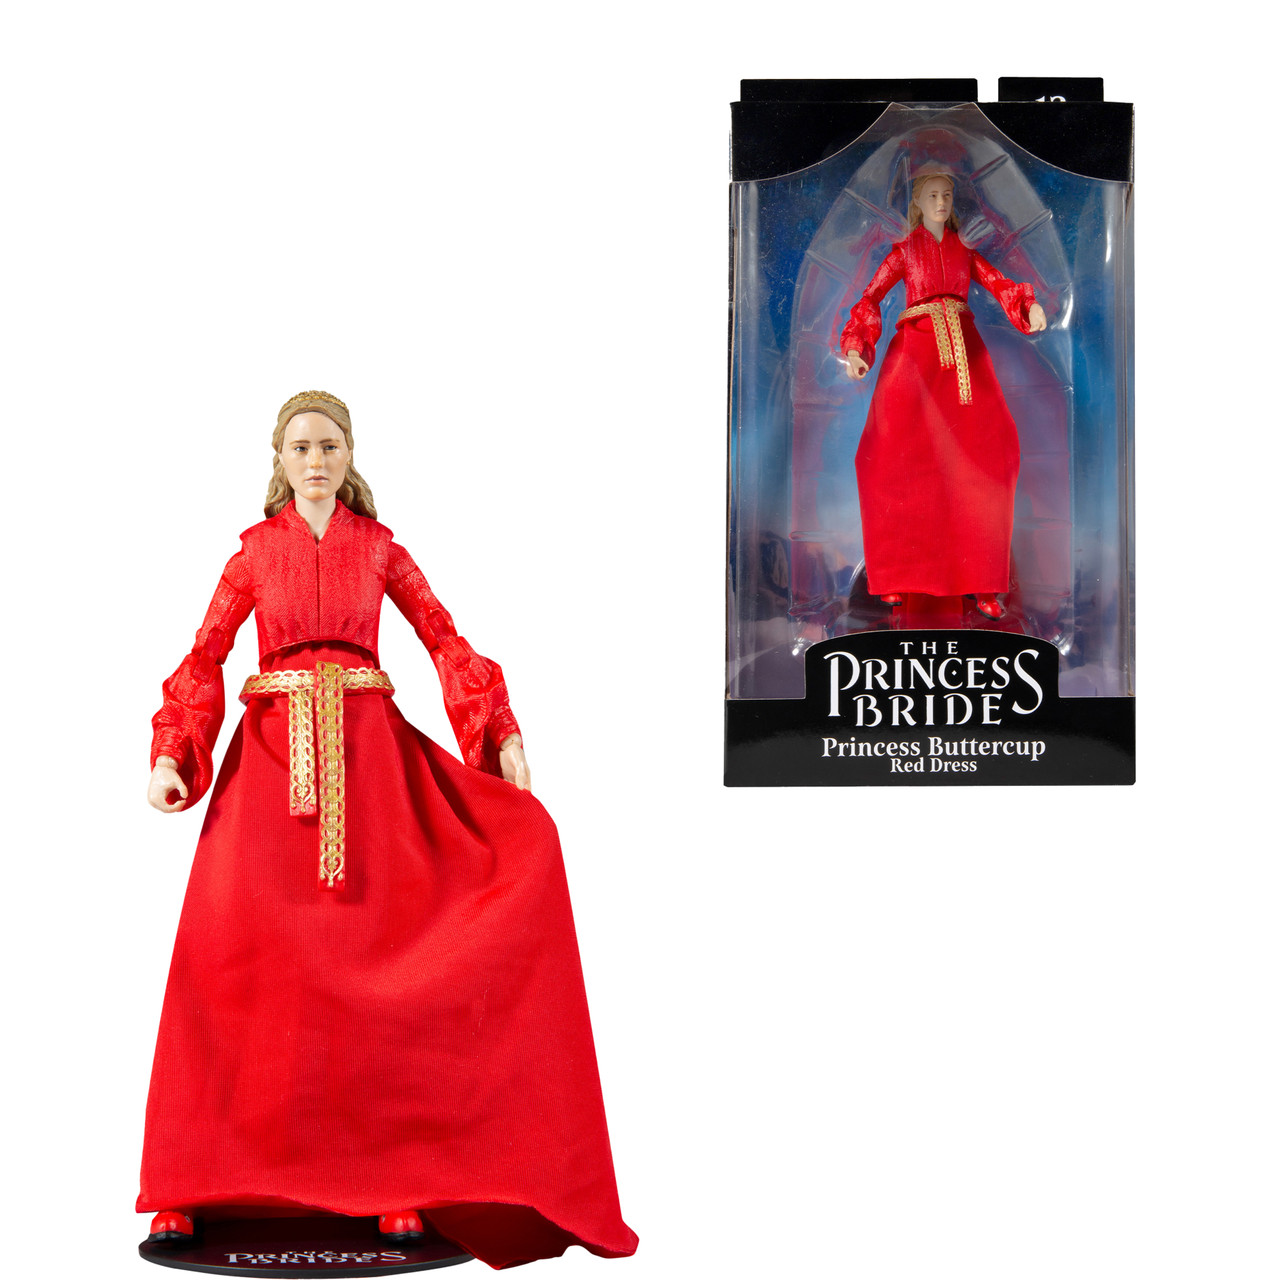 Princess Buttercup w/Red Dress (The Bride) Wave 1 - McFarlane Toys Store